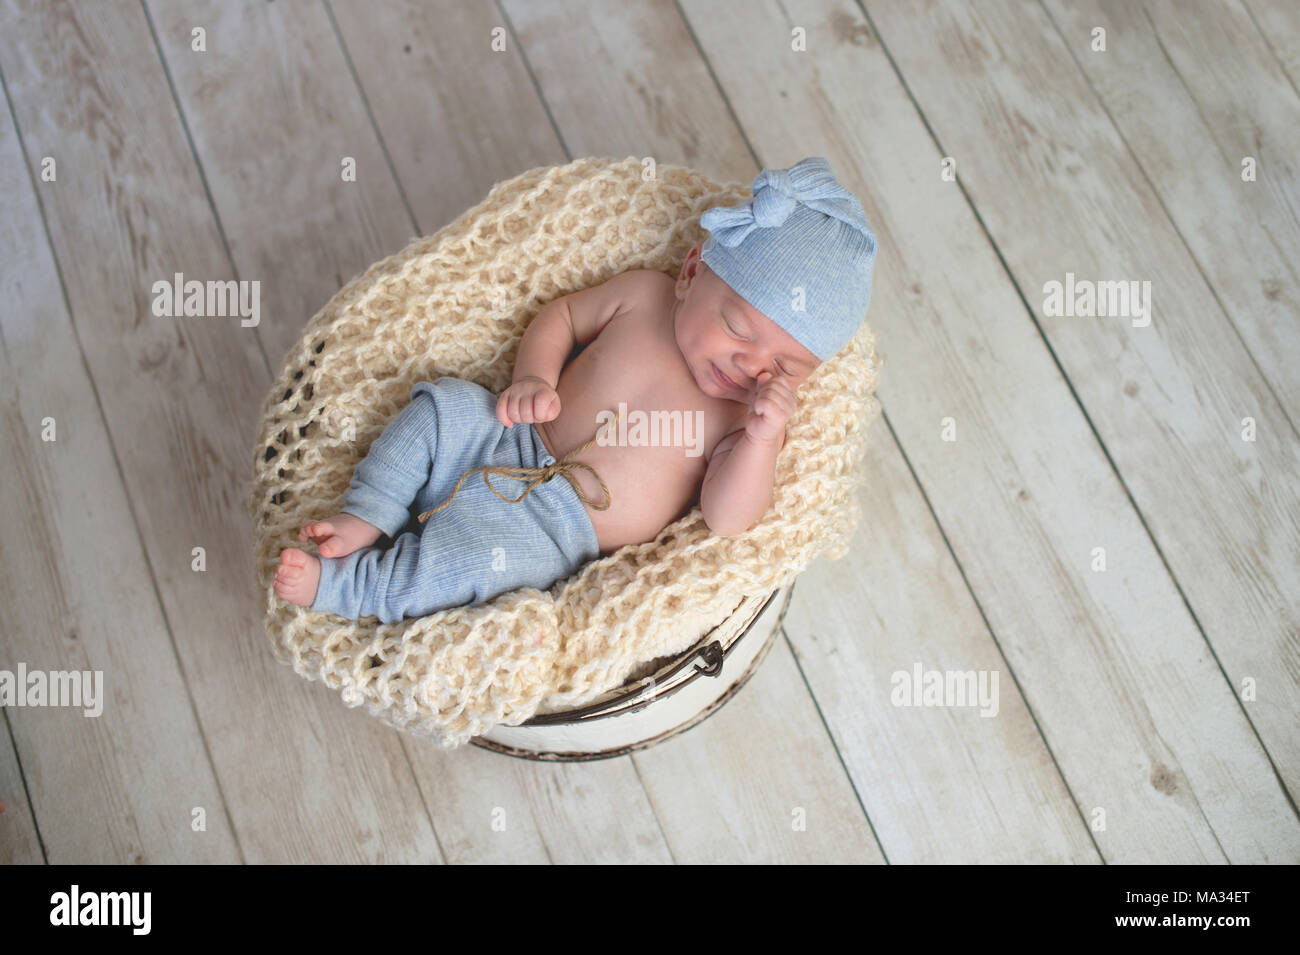 Six week old baby boy wearing light blue pjs and lying in a round, bucket. Shot in the studio on a light wood background. Stock Photo